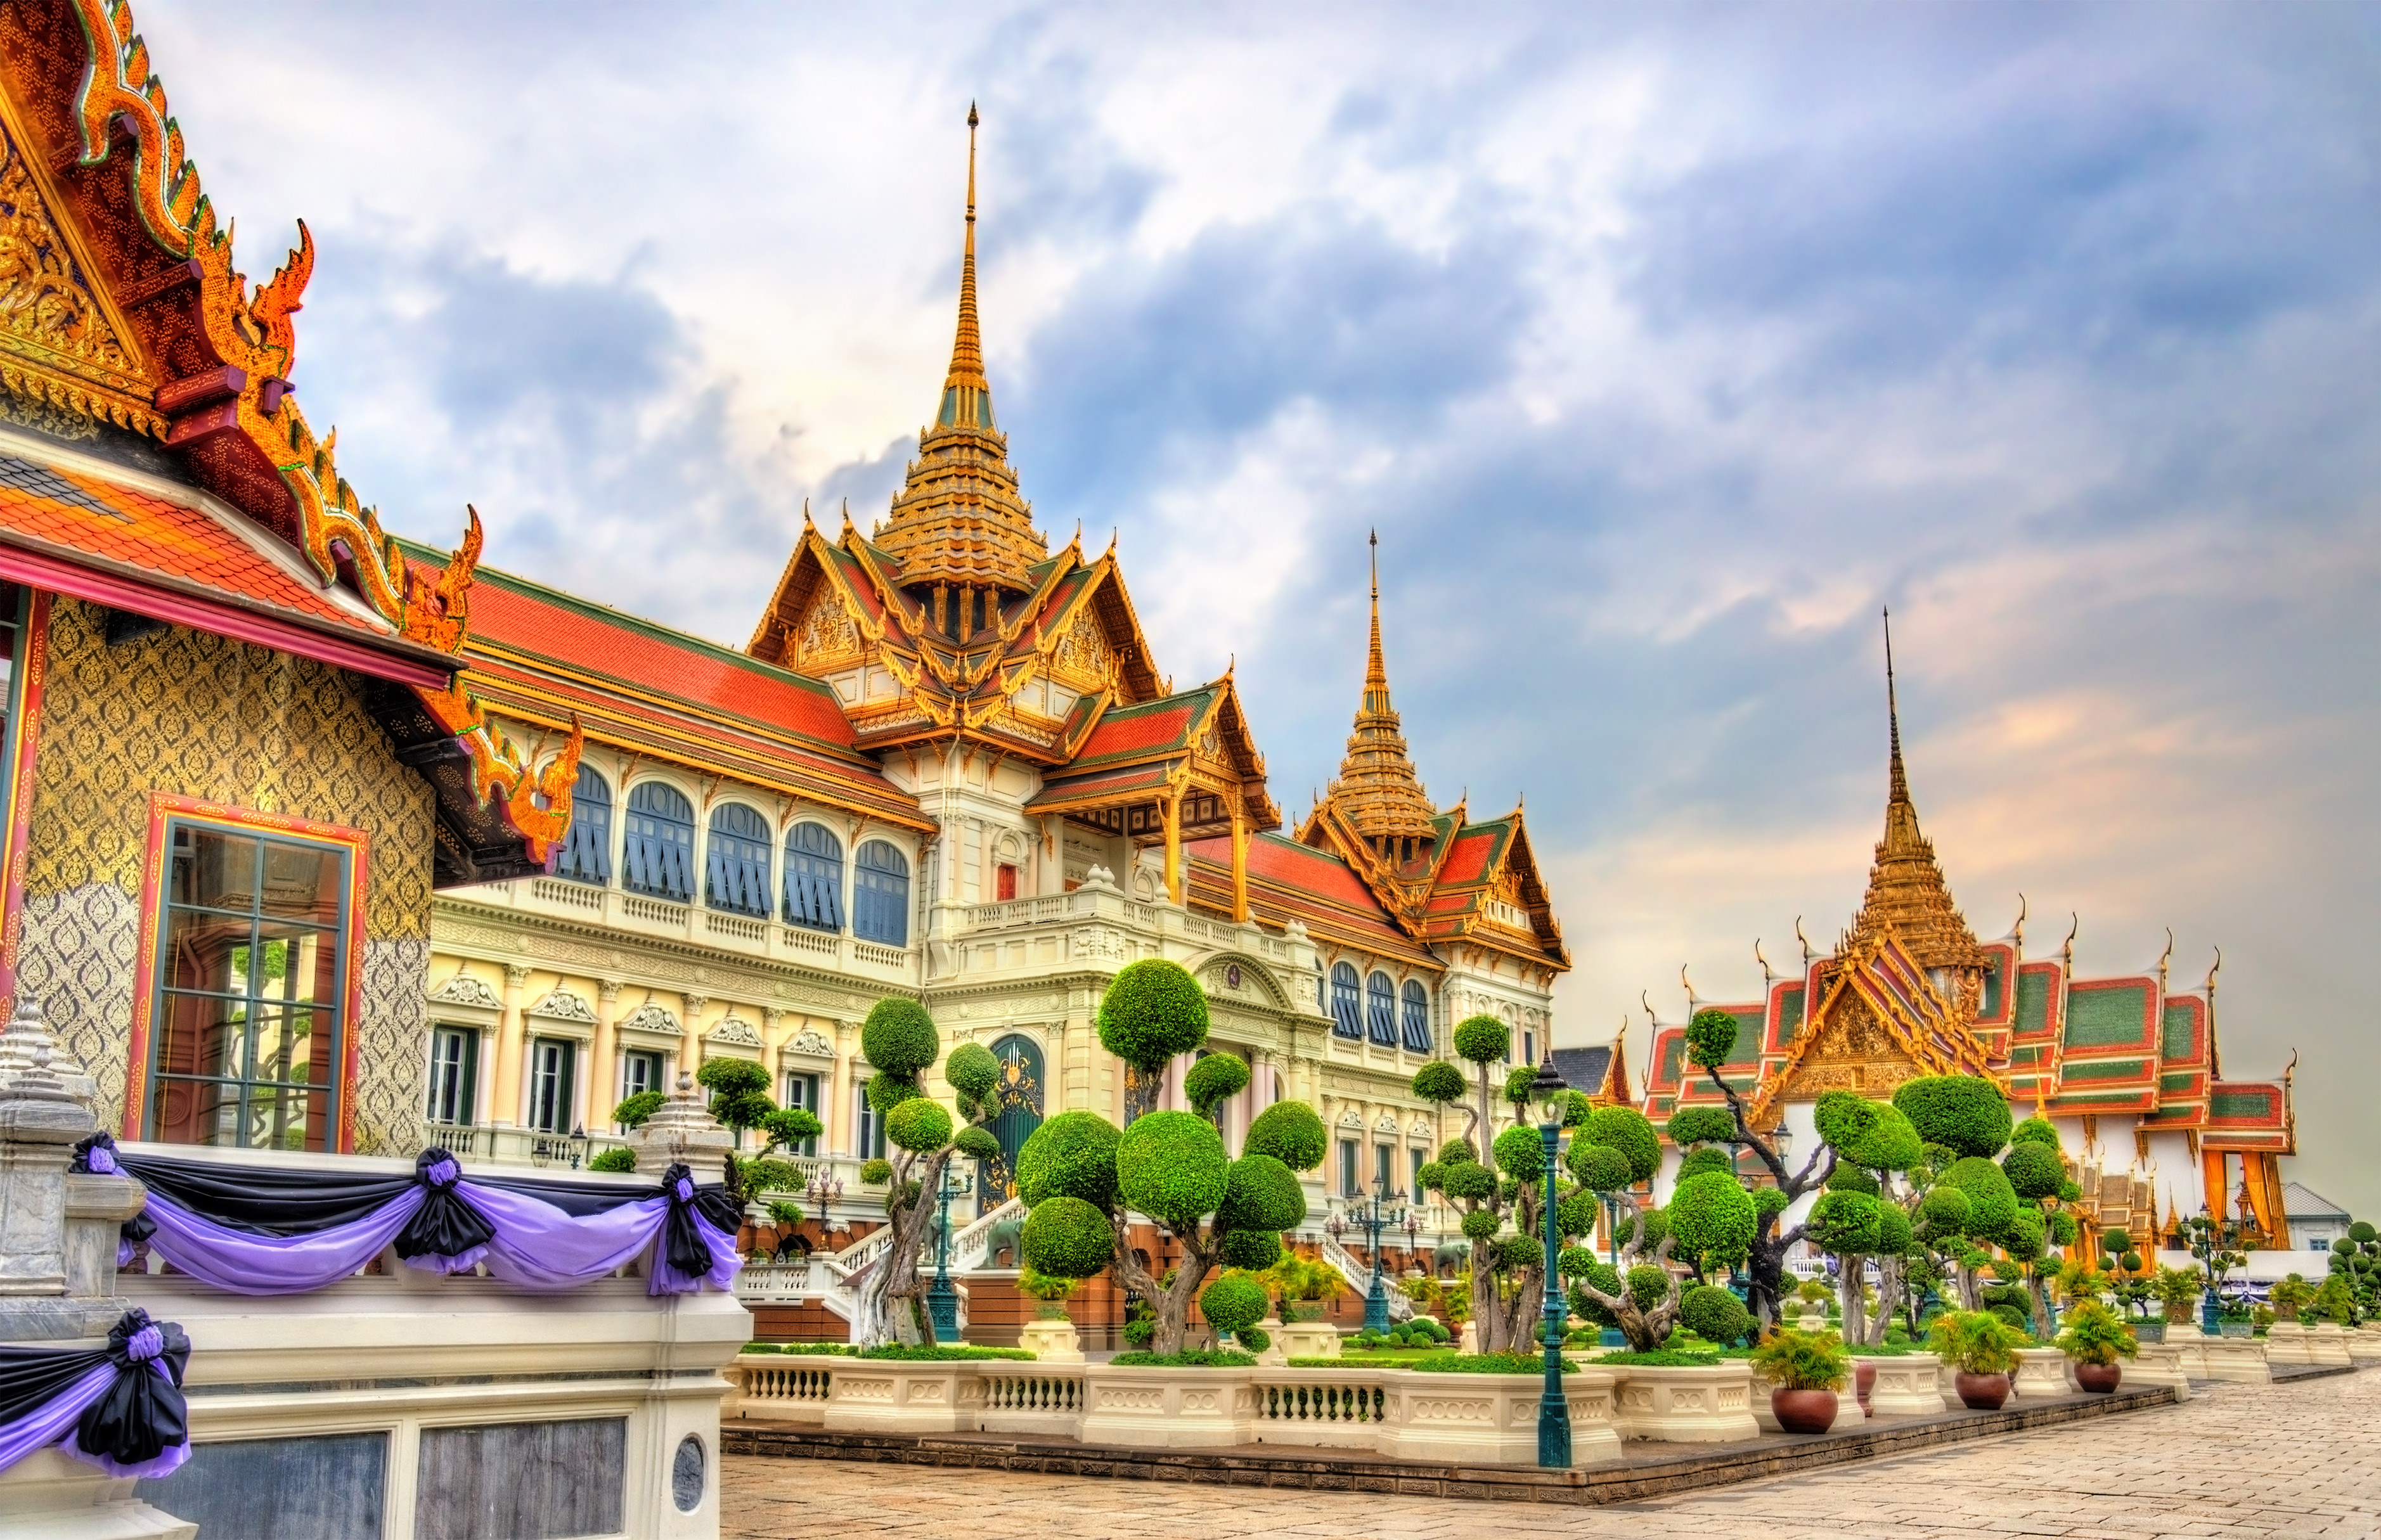 The Chakri Mahaprasat (Grand Palace Hall) at Grand Palace of Thailand in Bangkok with its European architecture at the bottom and a mon·dòp (a layered, heavily ornamented spire) atop each wing.